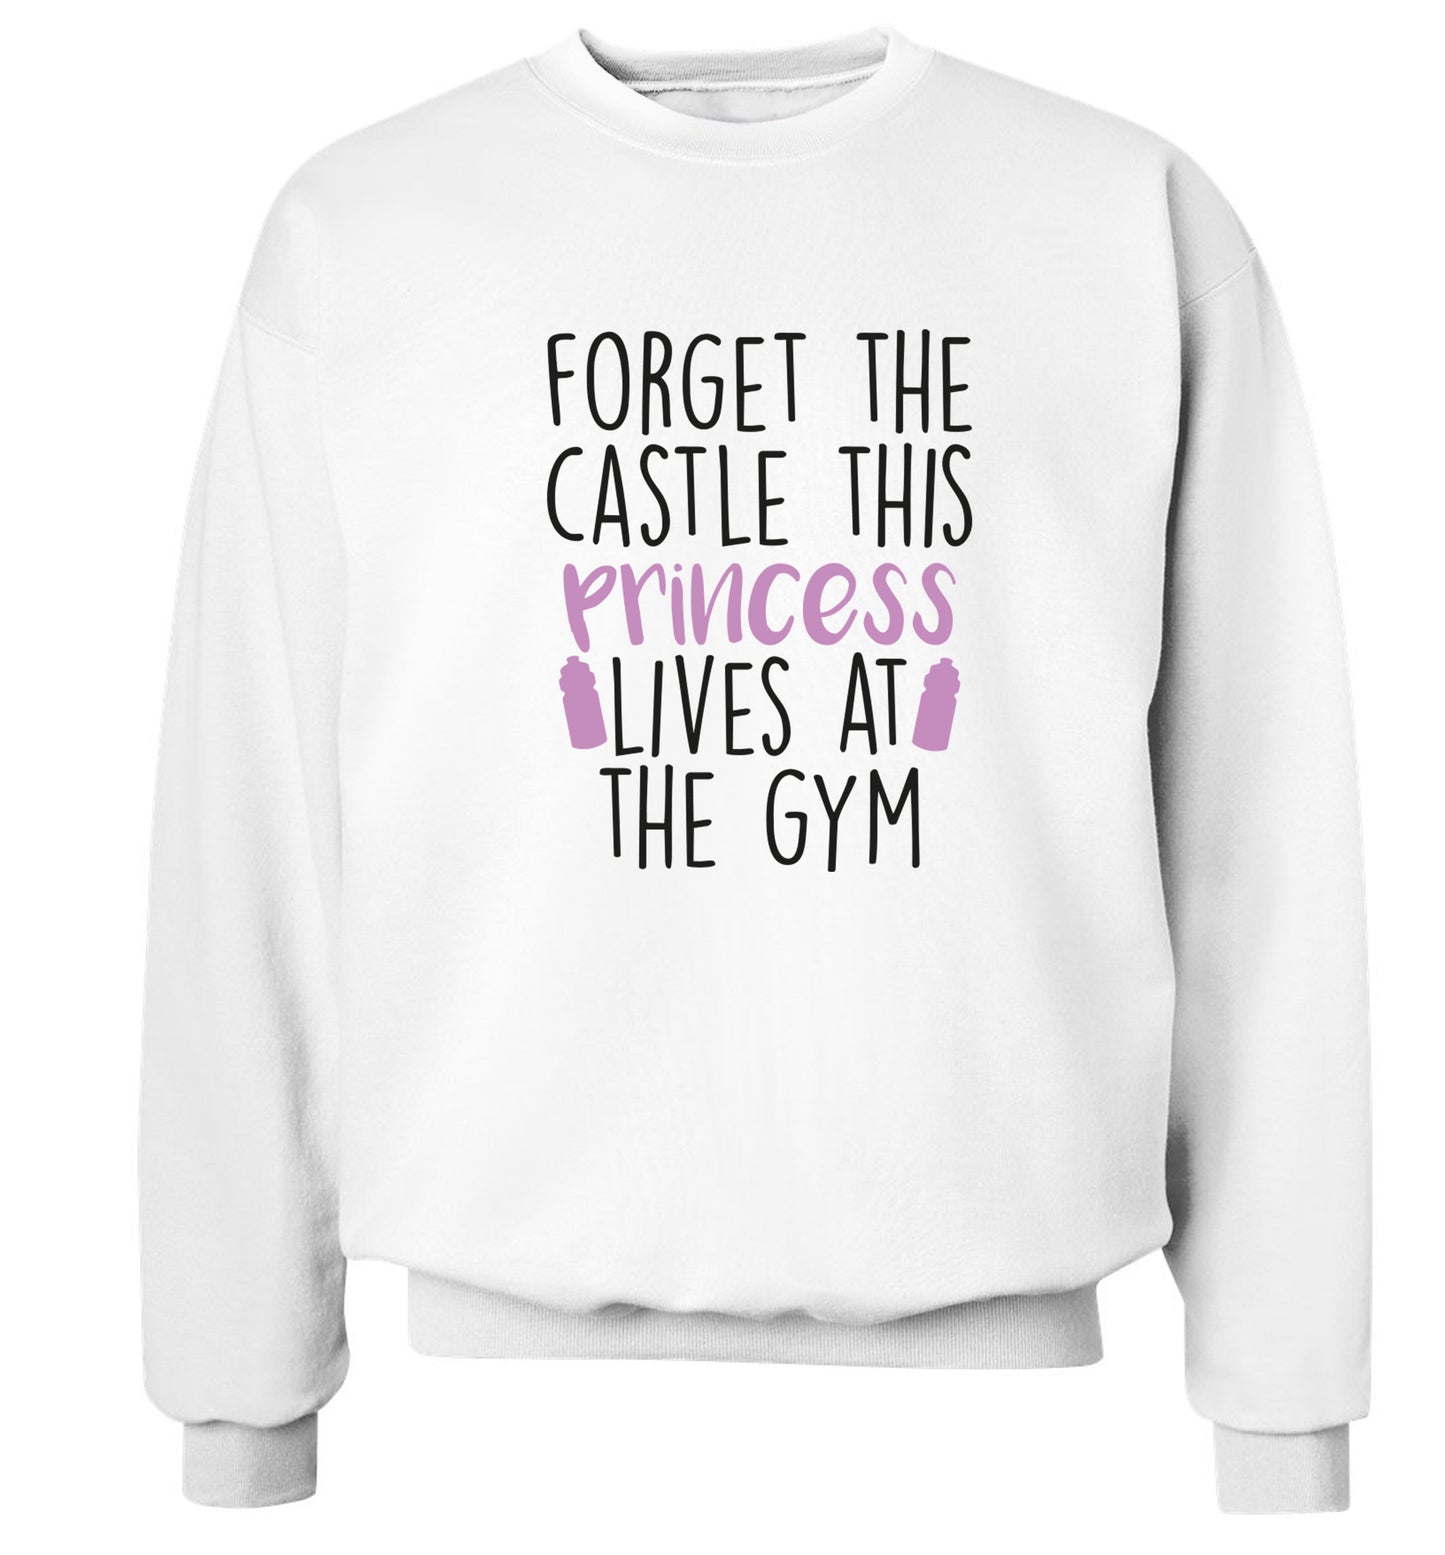 Forget the castle this princess lives at the gym Adult's unisex white Sweater 2XL